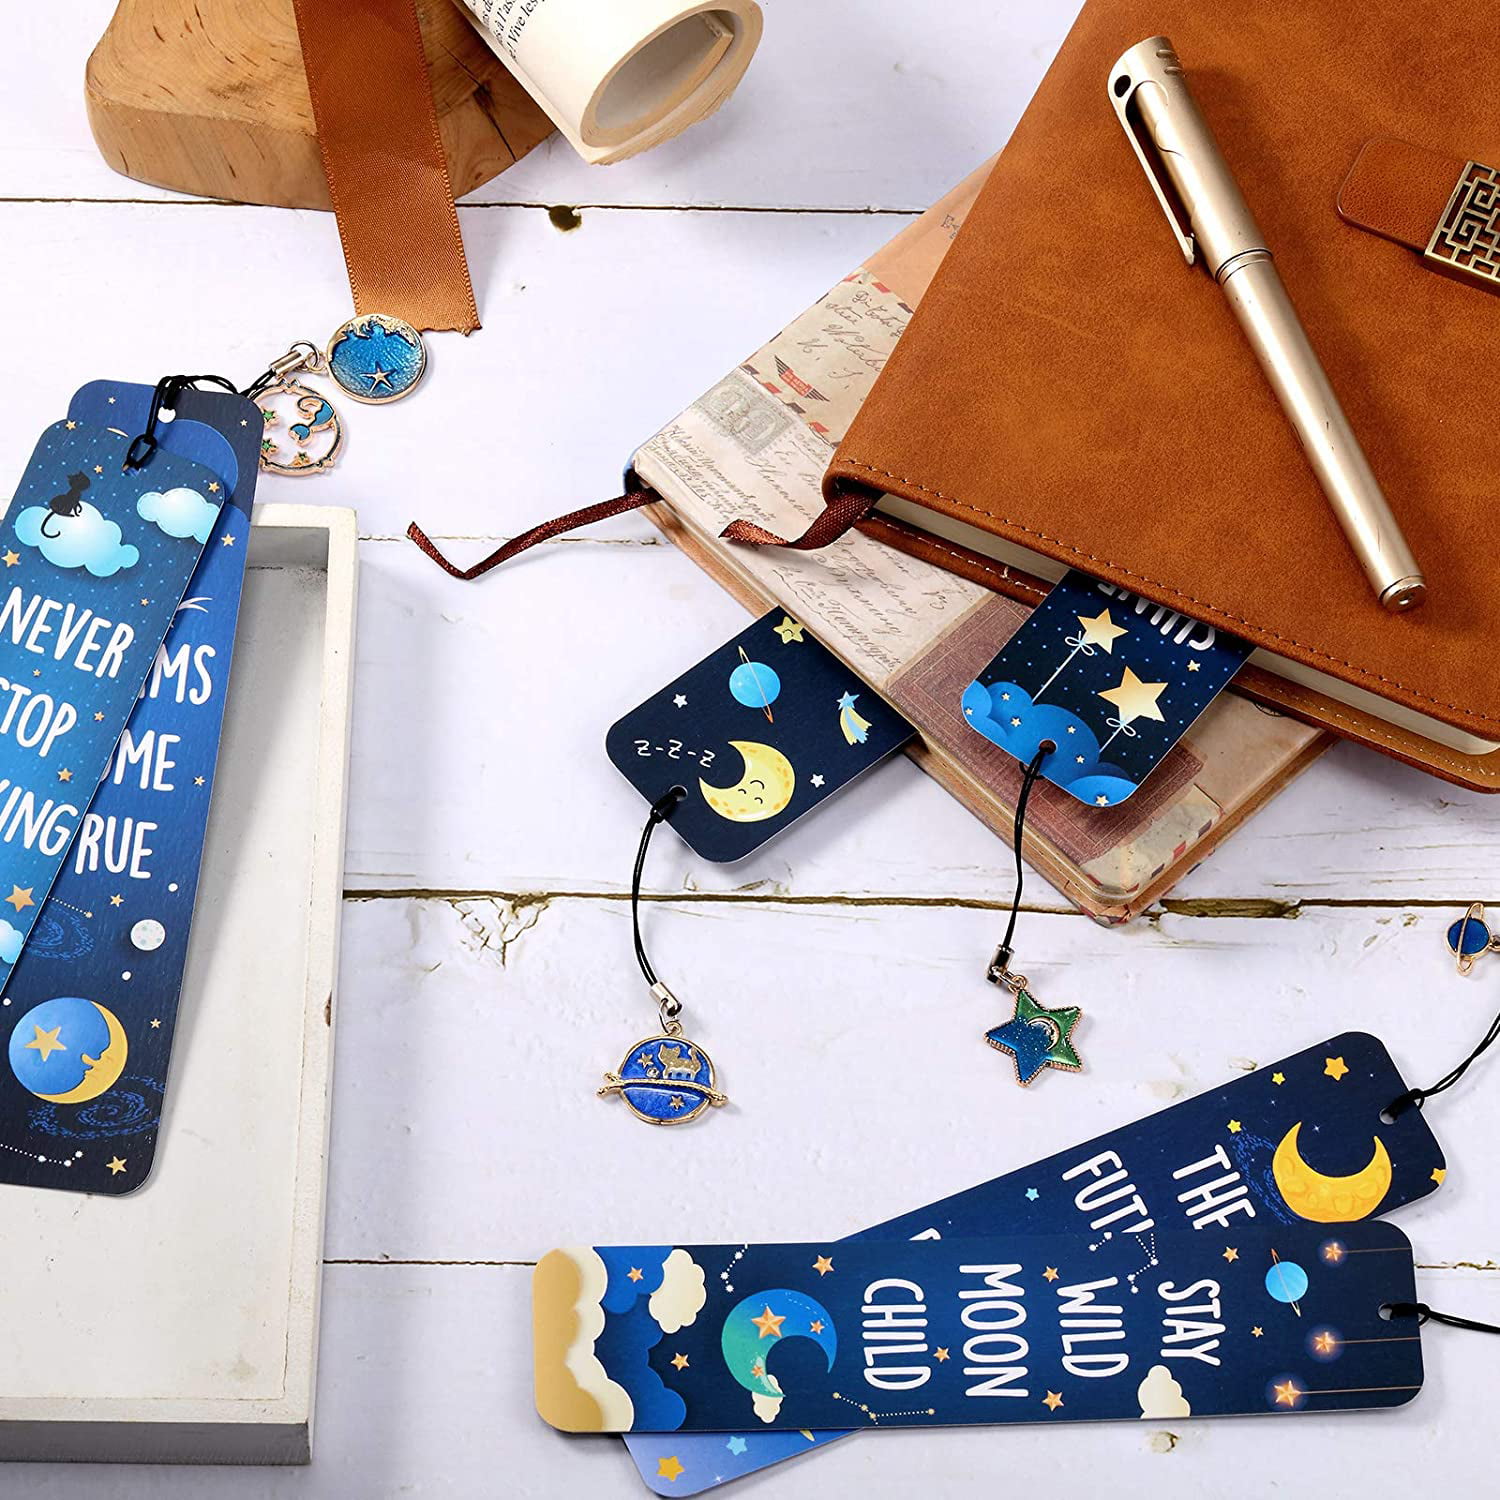 12 Pieces Cat Moon Star Celestial Theme Bookmarks with Metal Charms Celestial Bookmarks Inspirational Quotes Bookmarker for Boys and Girls School Classroom Present Reading